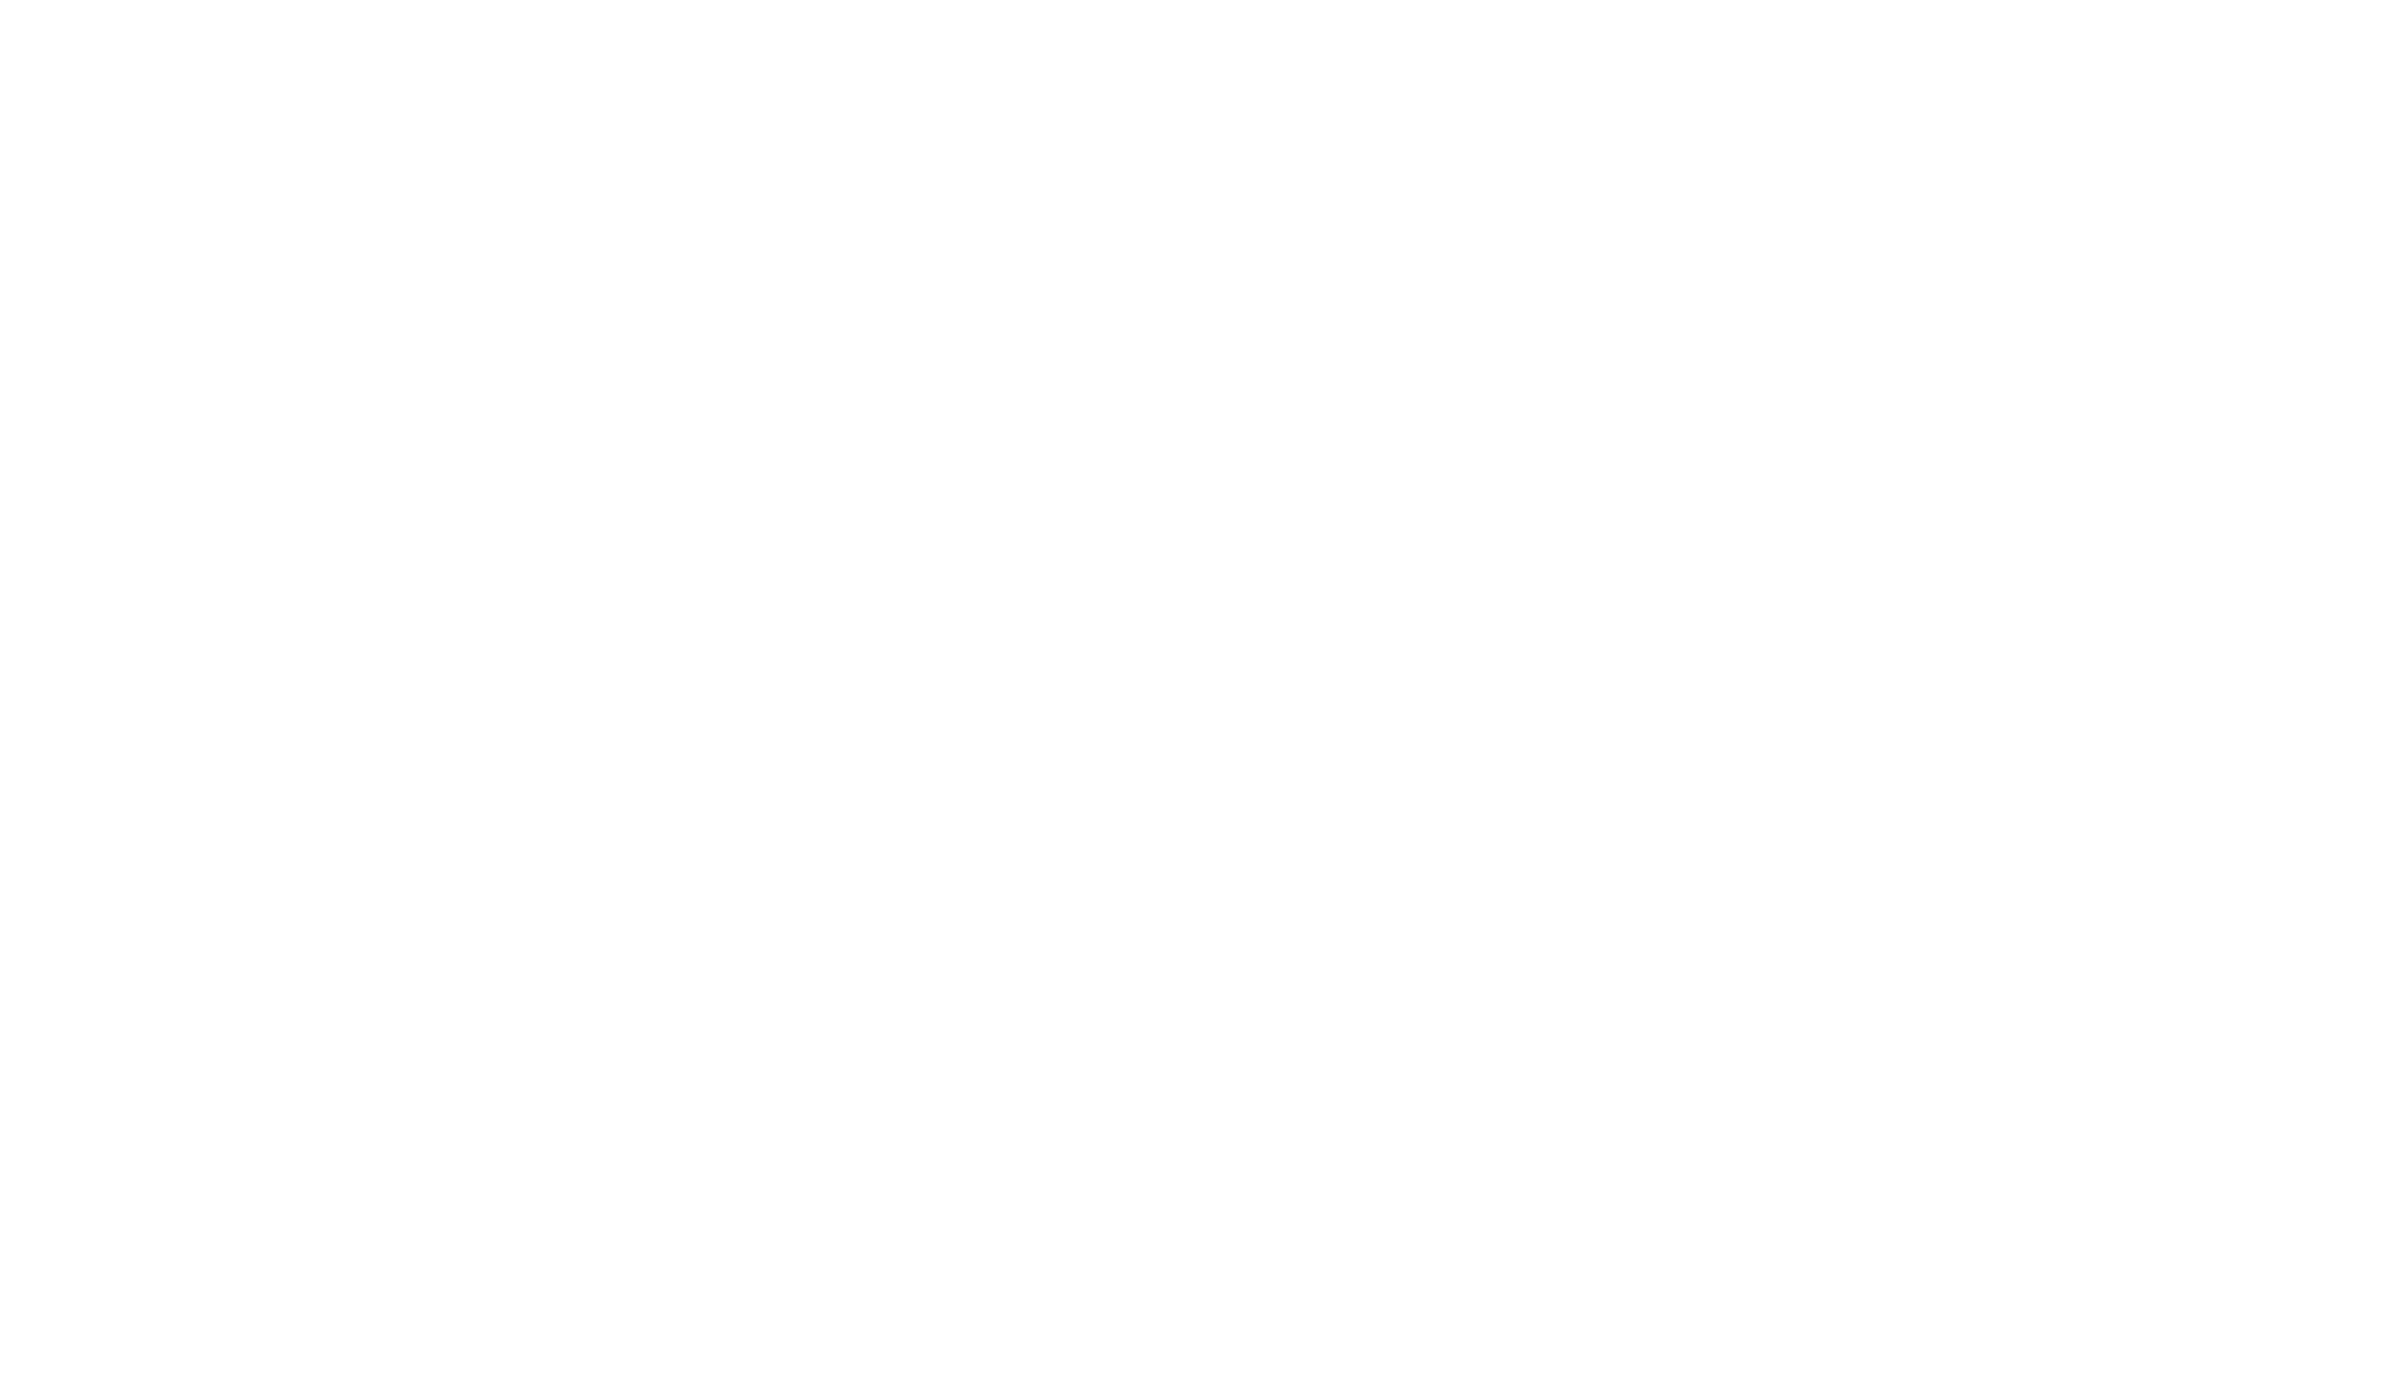 Lukas Müller Videography